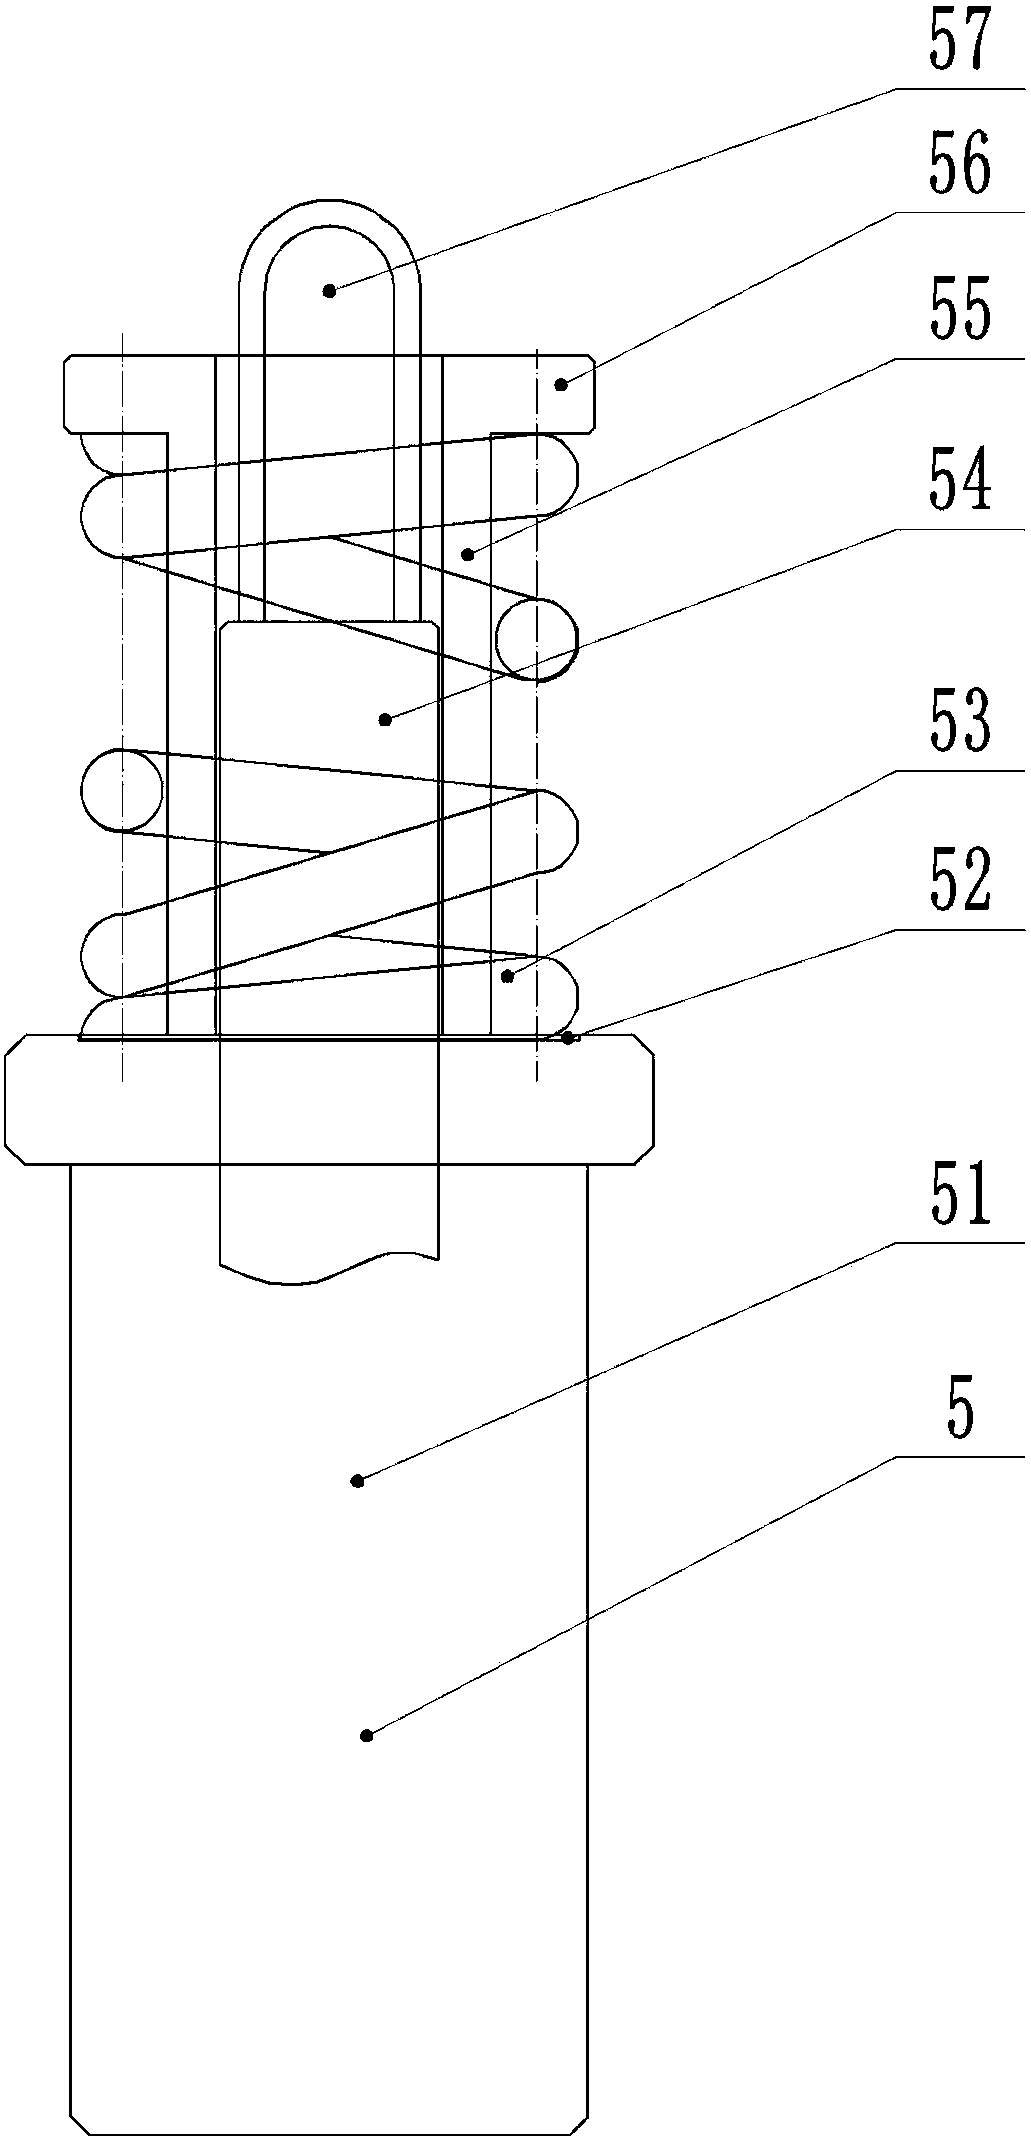 An assembly device for an insulating pull rod